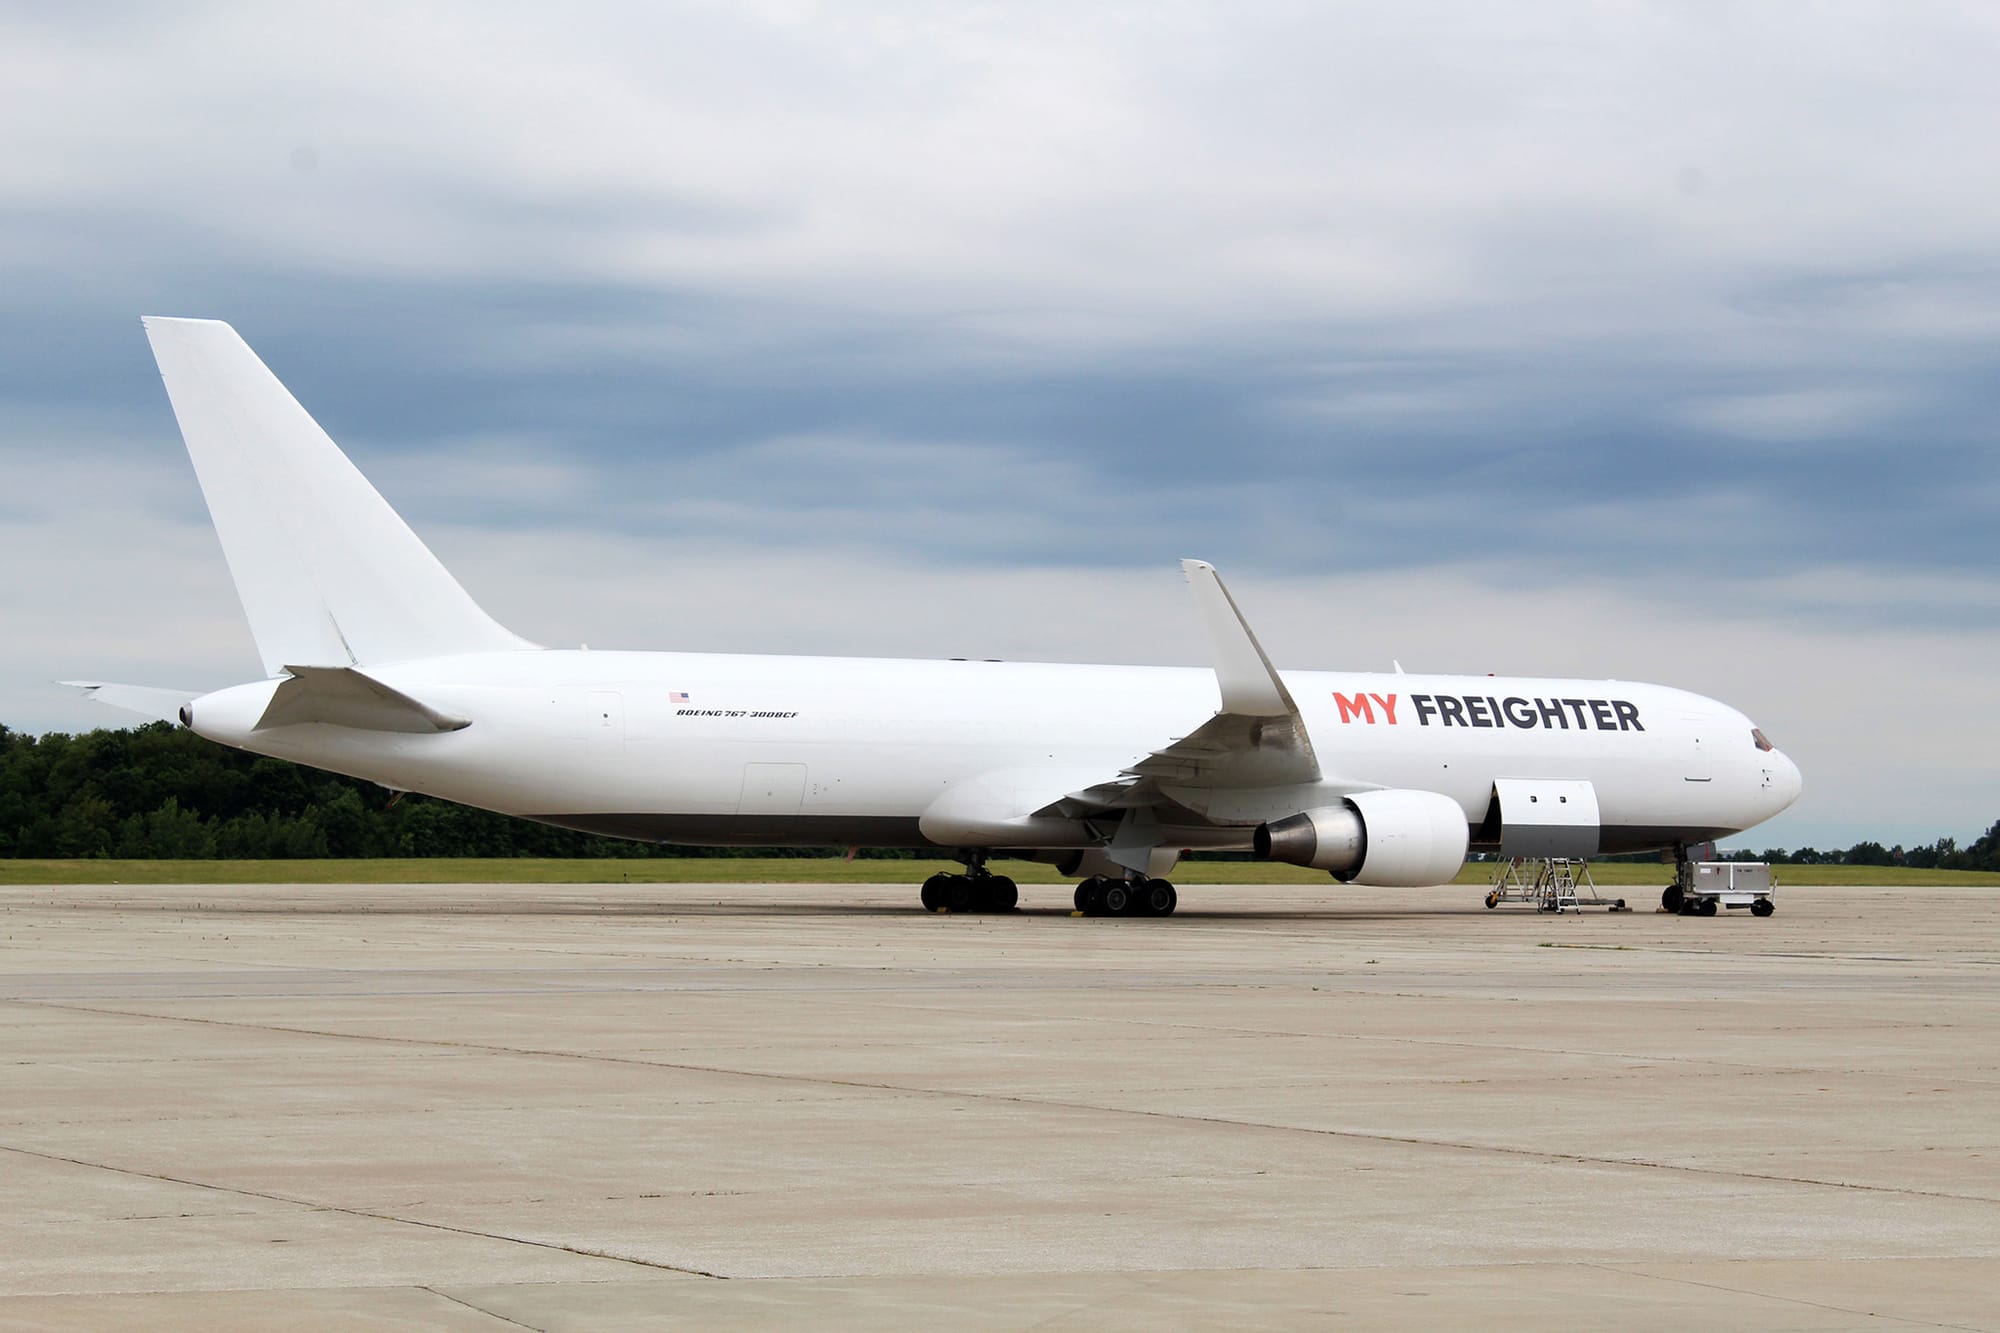 ATSG Announces Signed Lease Agreements for Two 767-300 Freighter Aircraft to My Freighter